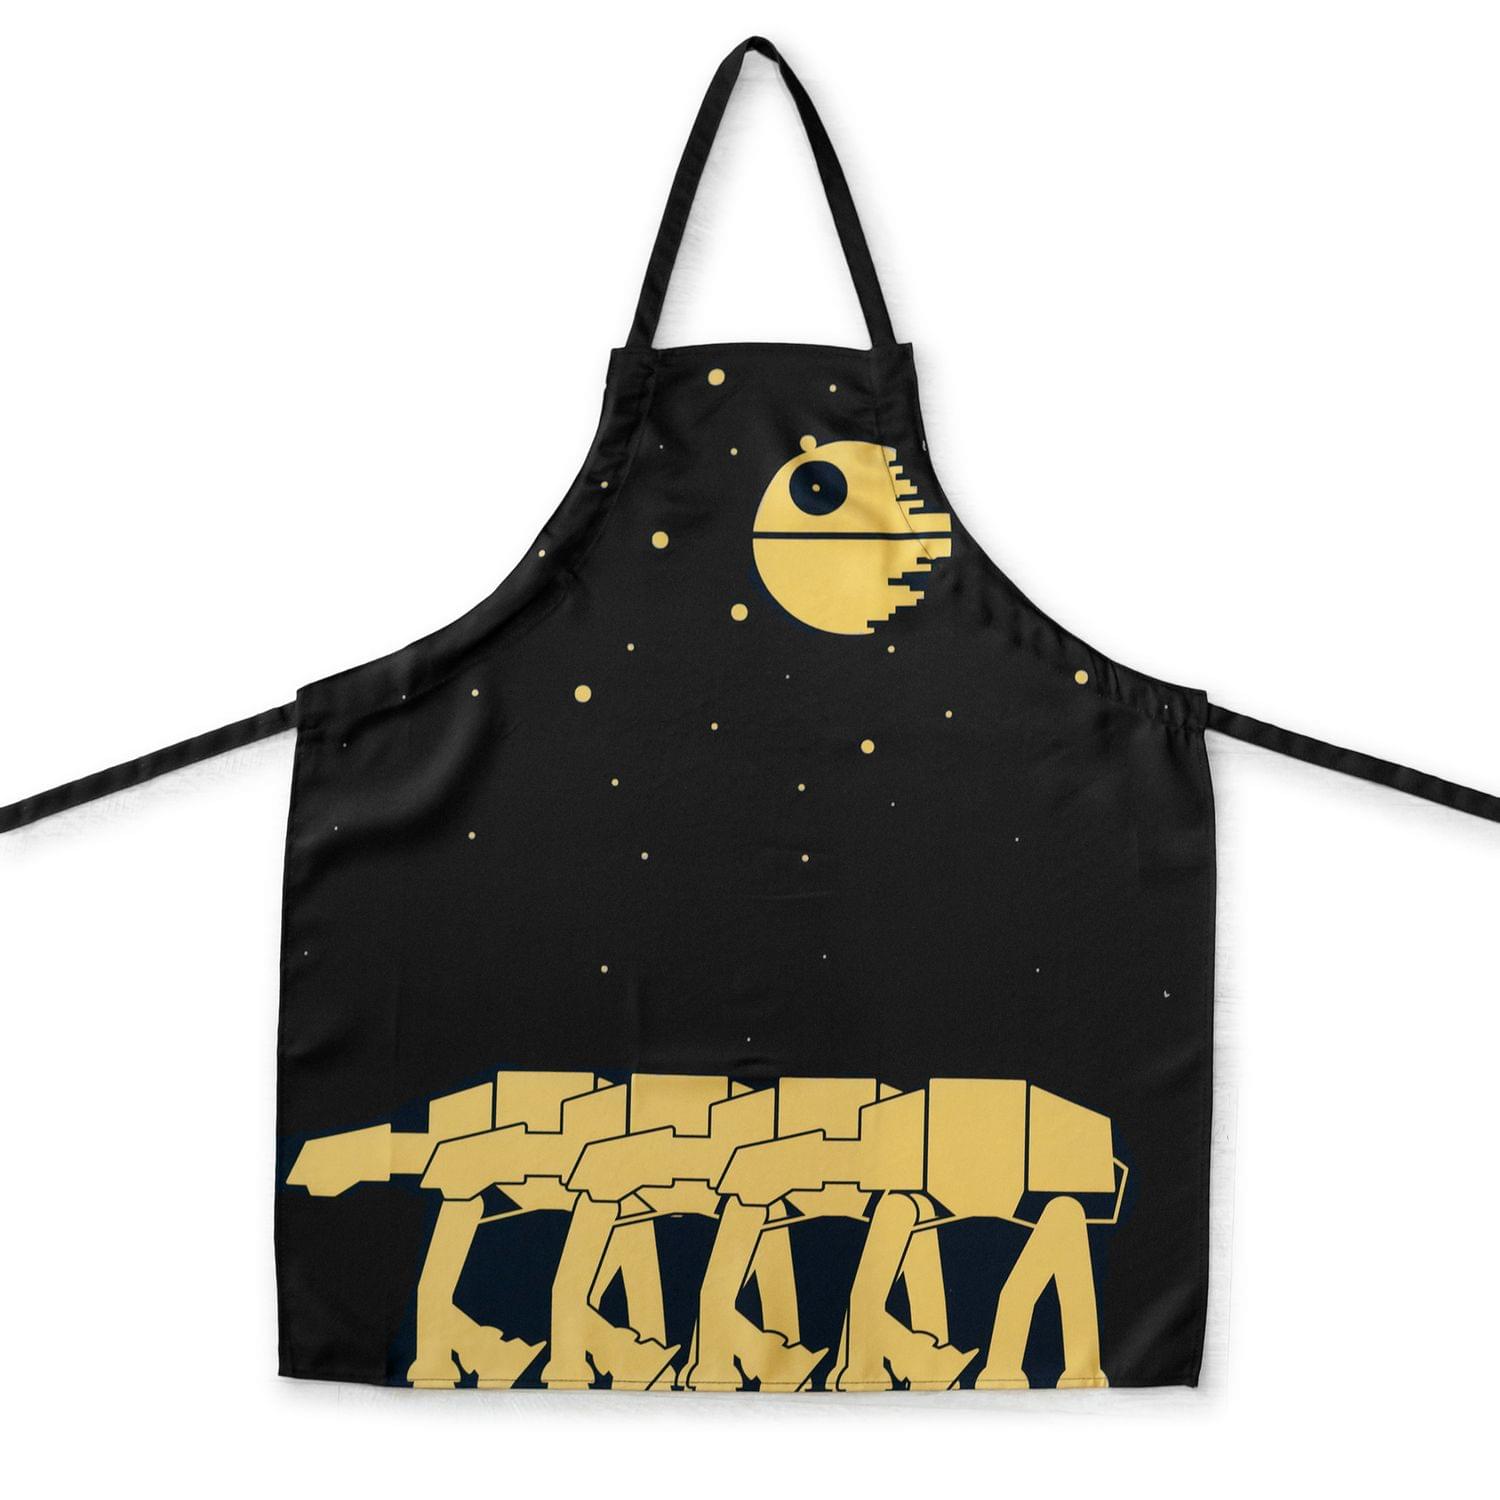 OFFICIAL Star Wars Kitchen Apron , Cooking Apron With Death Star & AT-AT Walkers